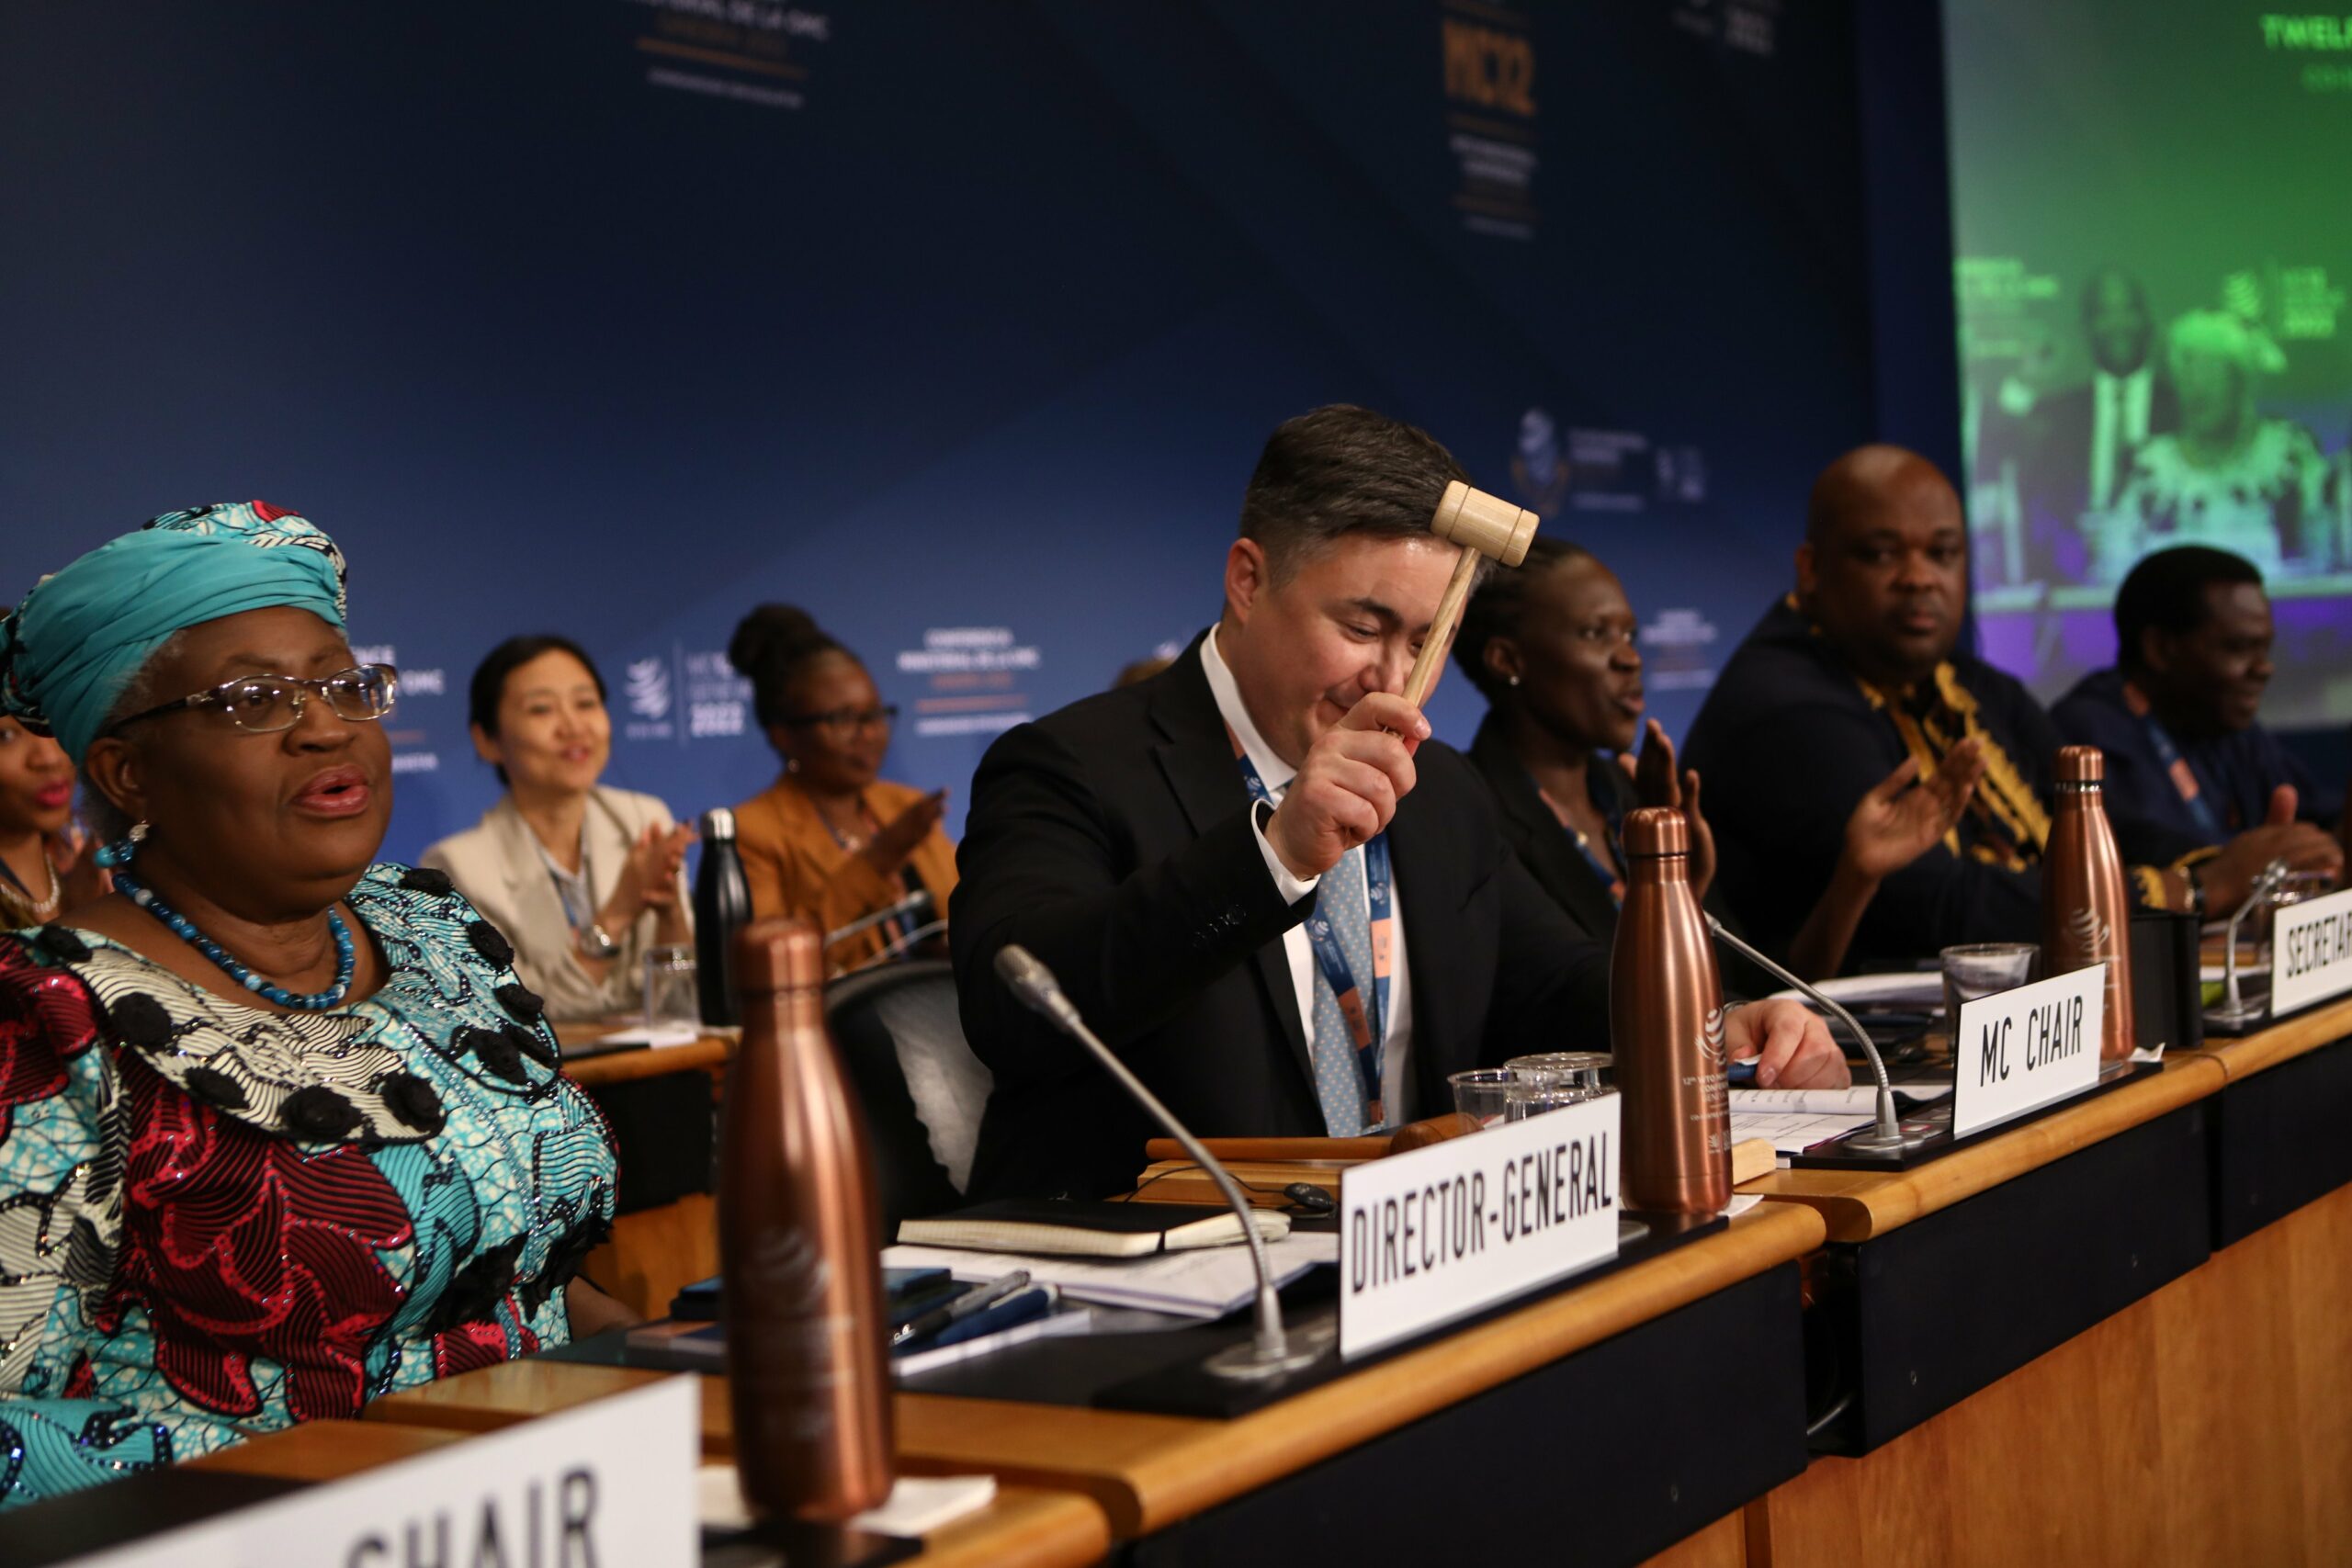 Timur Suleimenov, chair of the World Trade Organization’s 12th Ministerial Conference, brings down the gavel to close proceedings after parties agreed on a ban on harmful fisheries subsidies, Geneva, 17 June